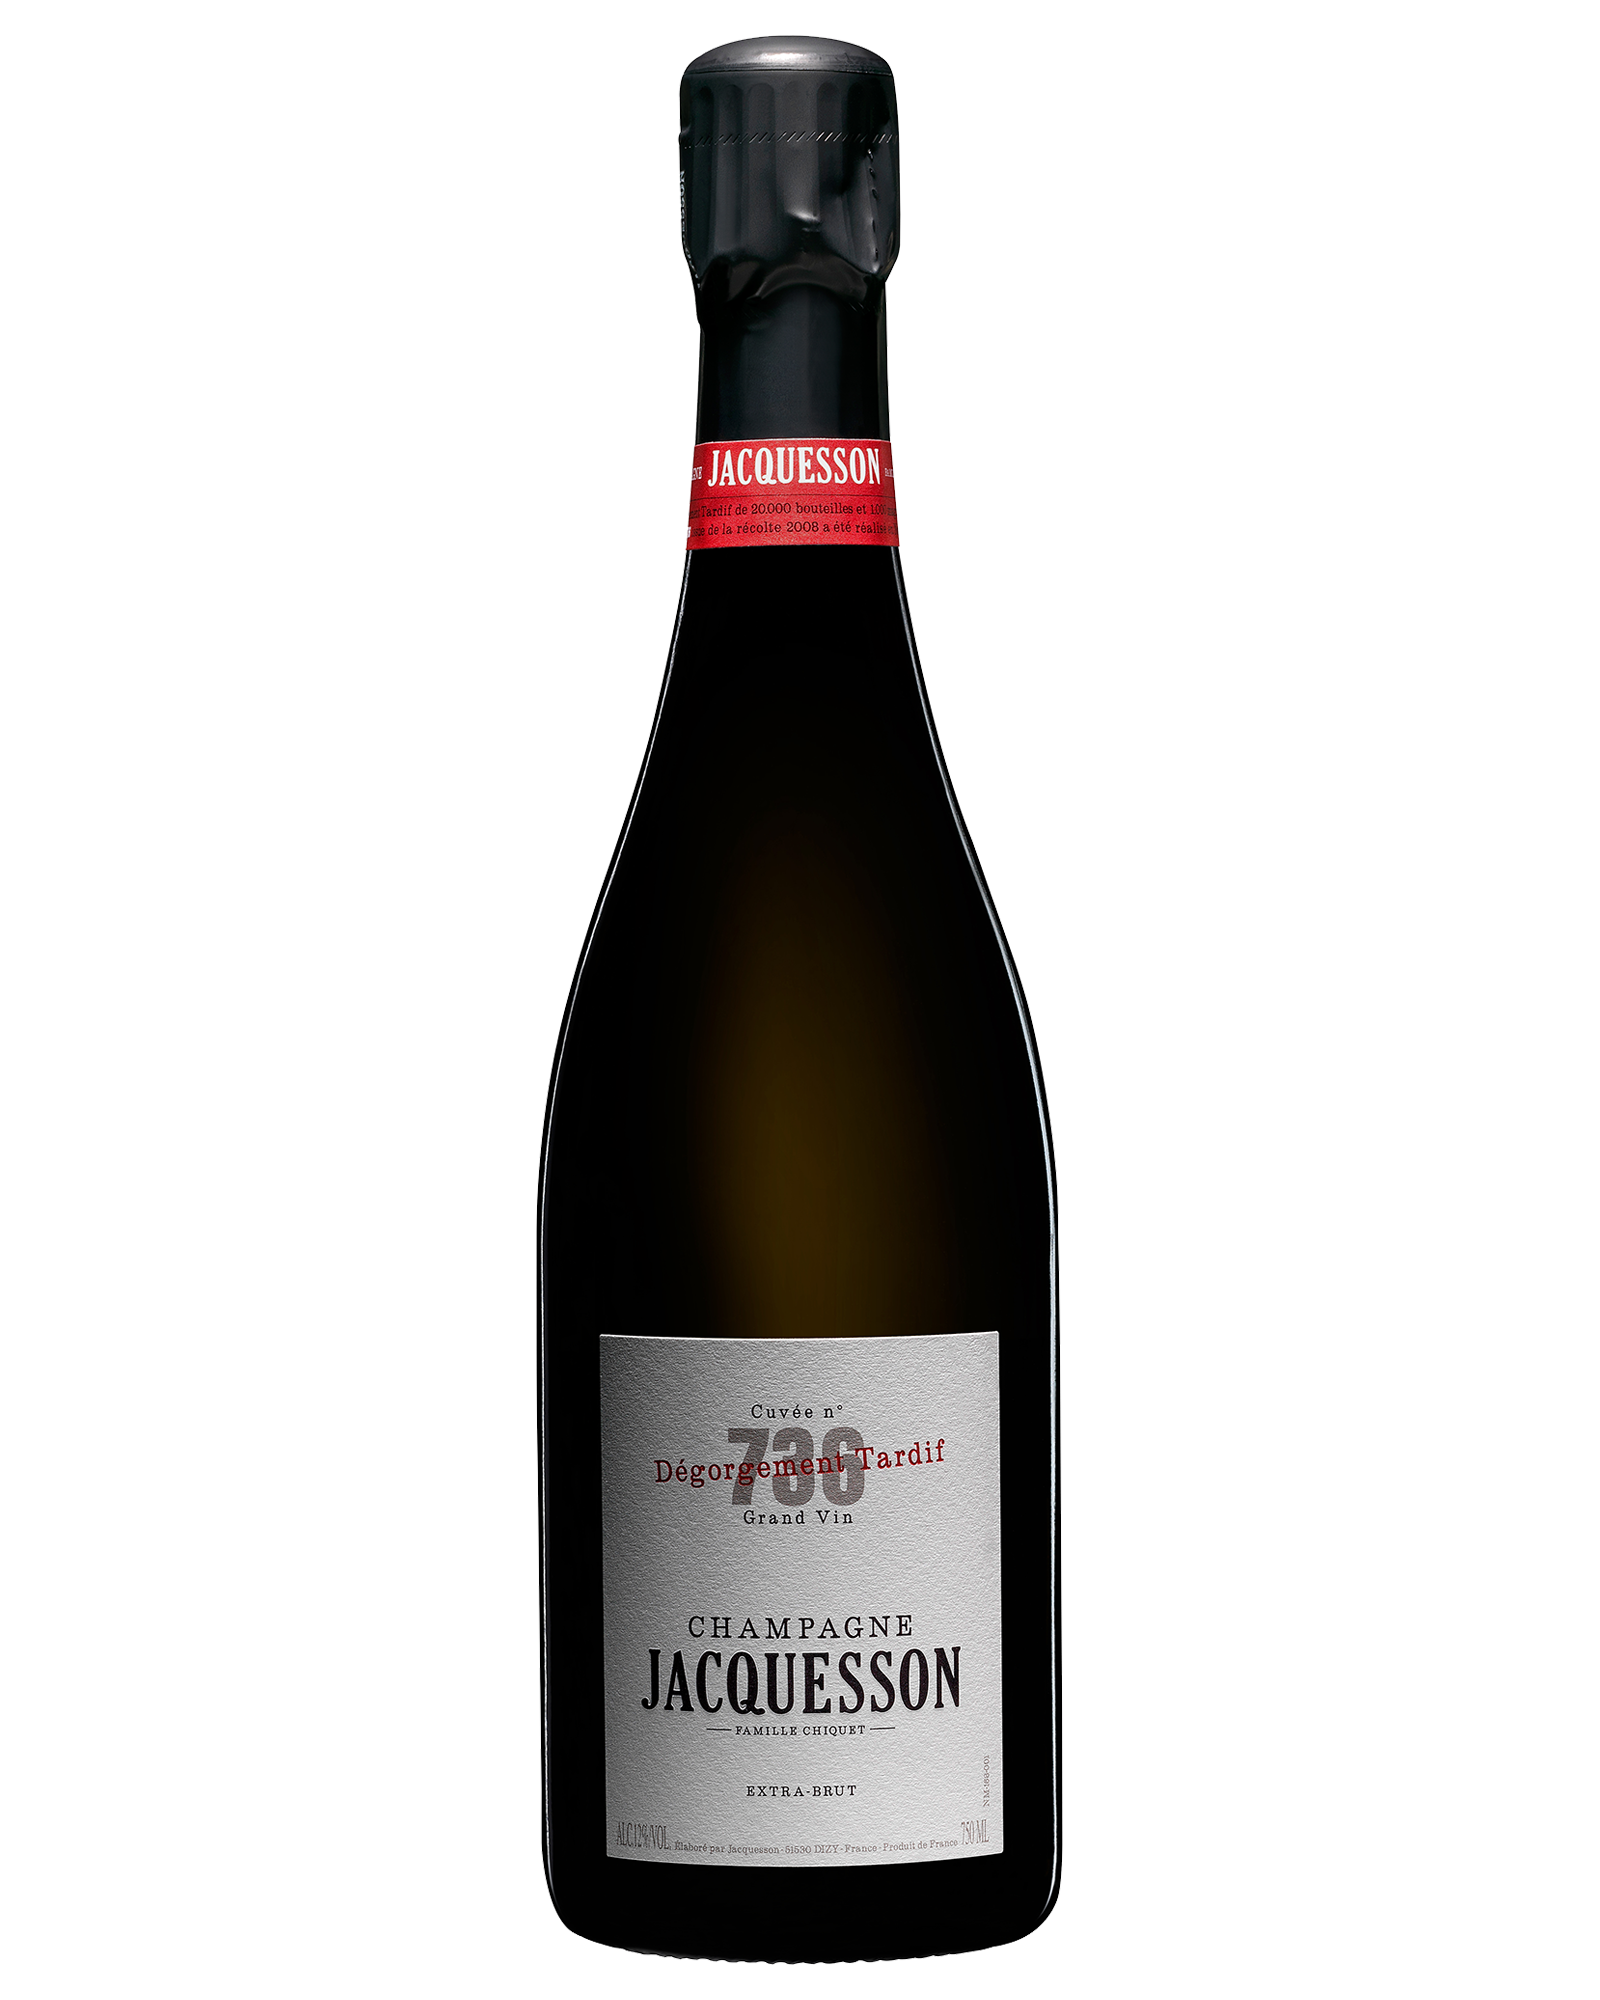 Jacquesson Late Disgorged Cuvee 736